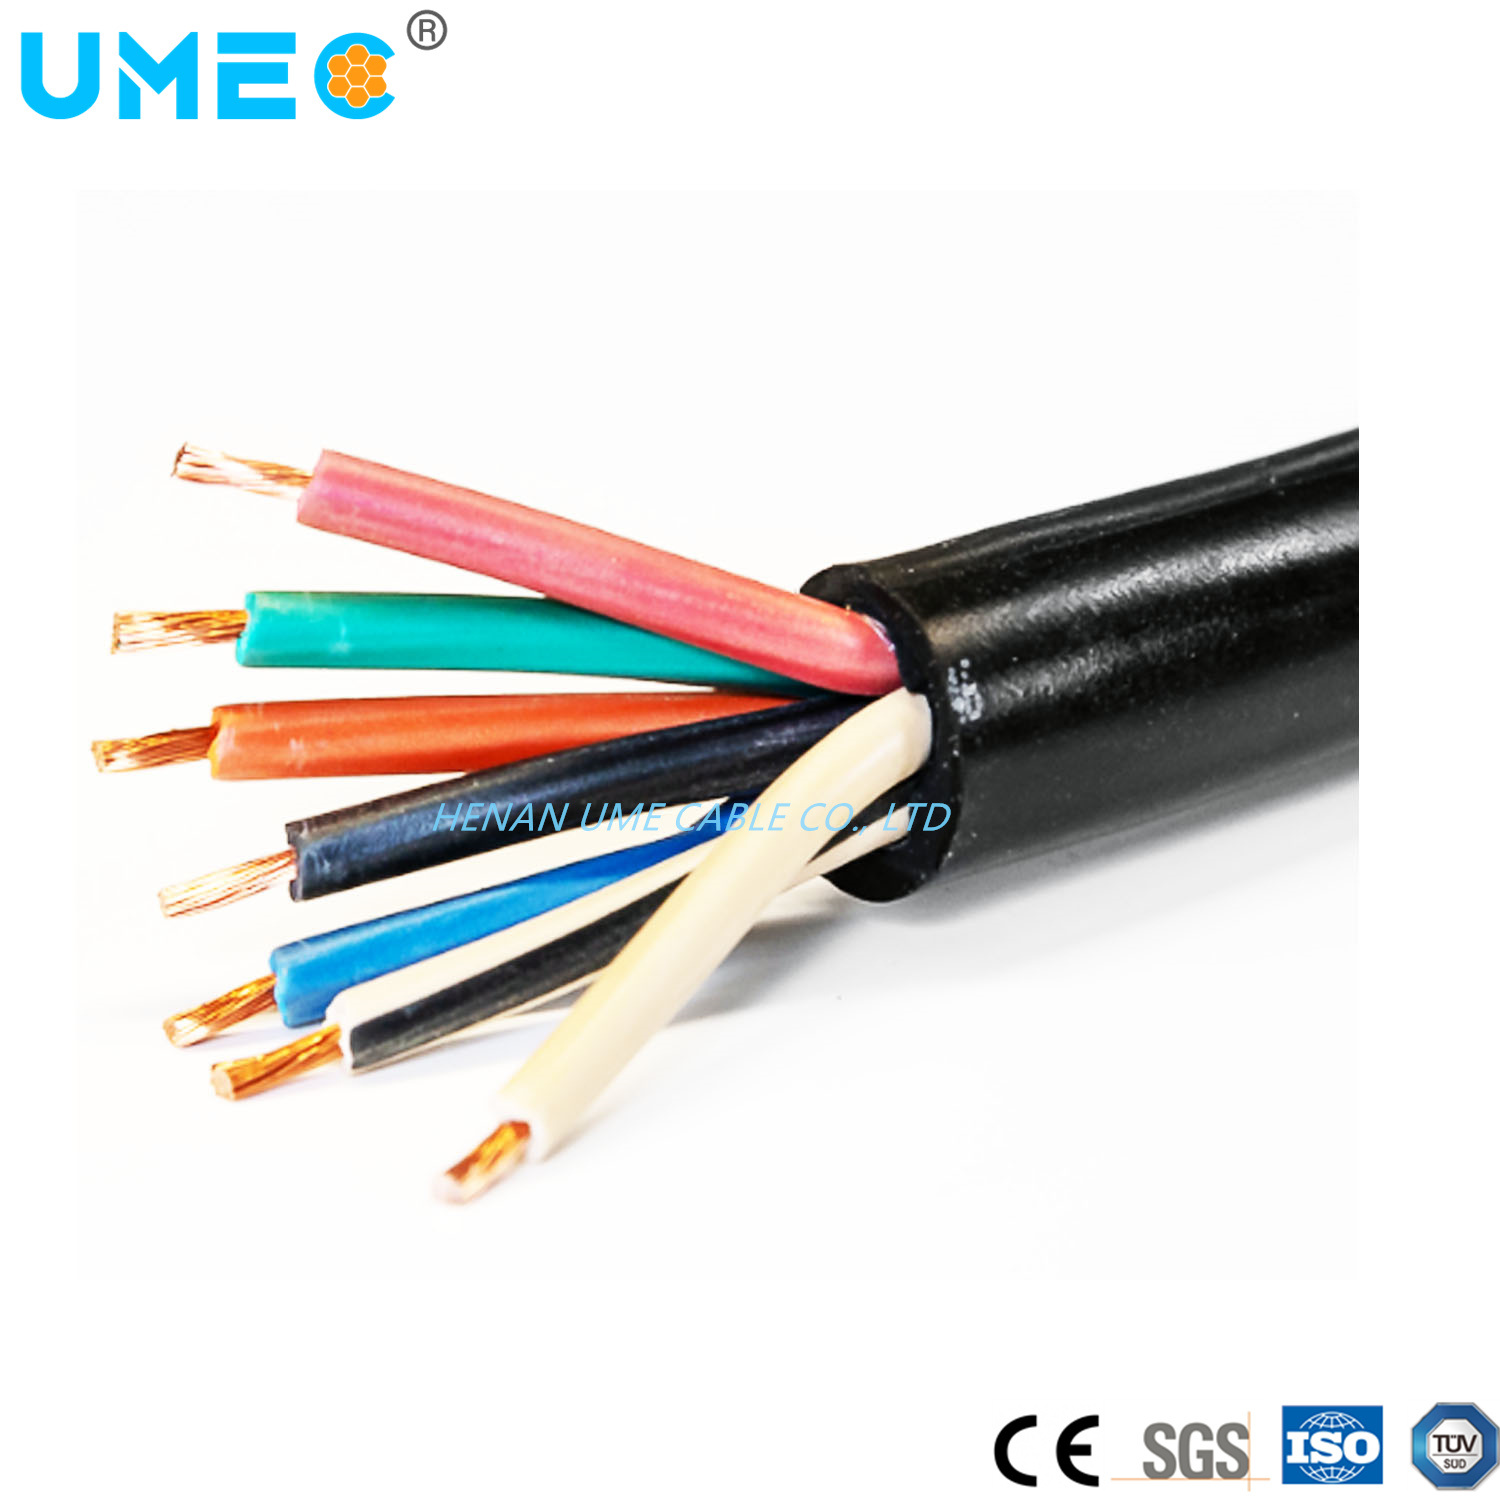 Philippines Best Selling So Sow Soow Ume Cord 18 16AWG Black 300V 600V Rubber Cable Factory Price